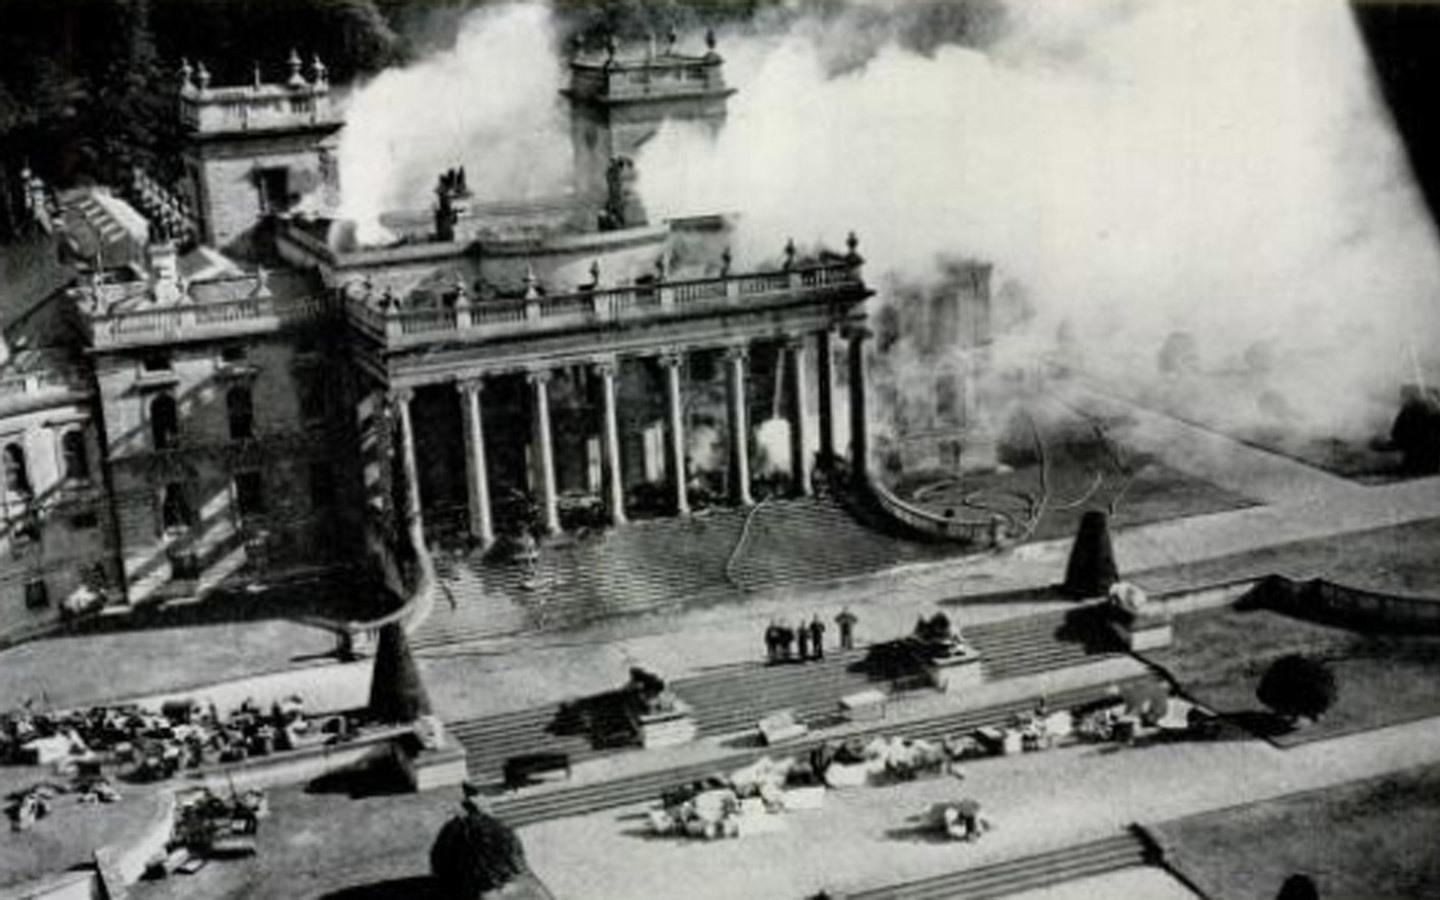 The Witley Court fire in 1937